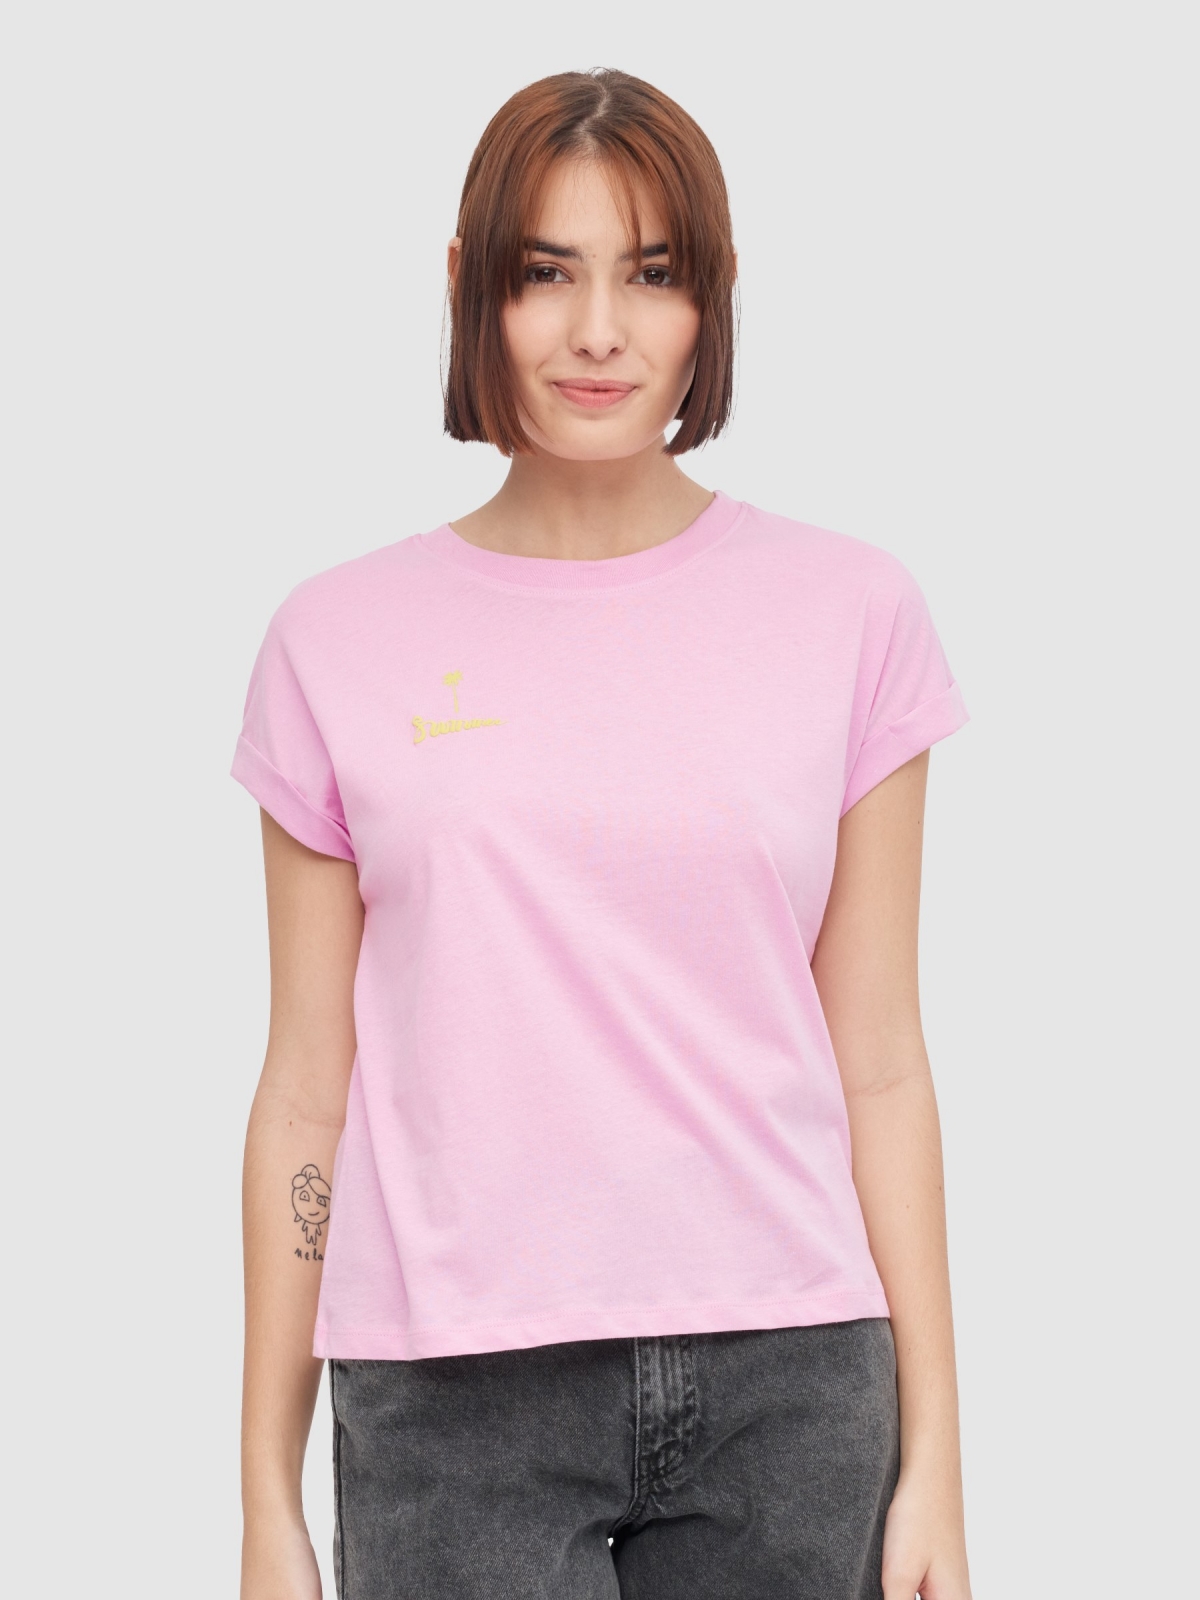 More Summer t-shirt magenta middle front view